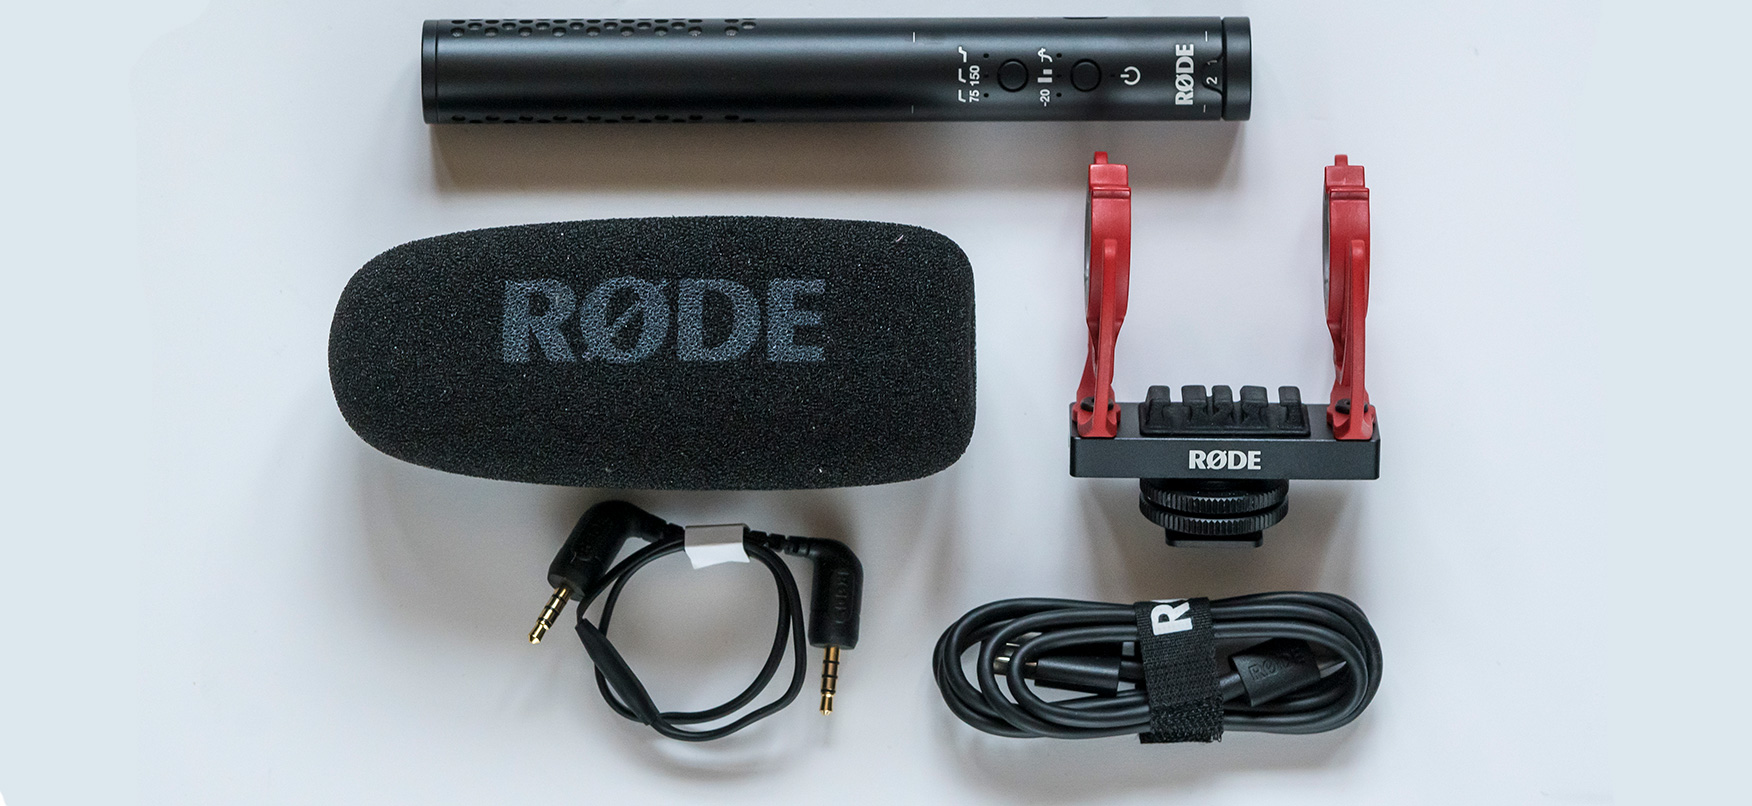 PROMM REVIEWS THE RODE VIDEOMIC NTG - Pro Moviemaker